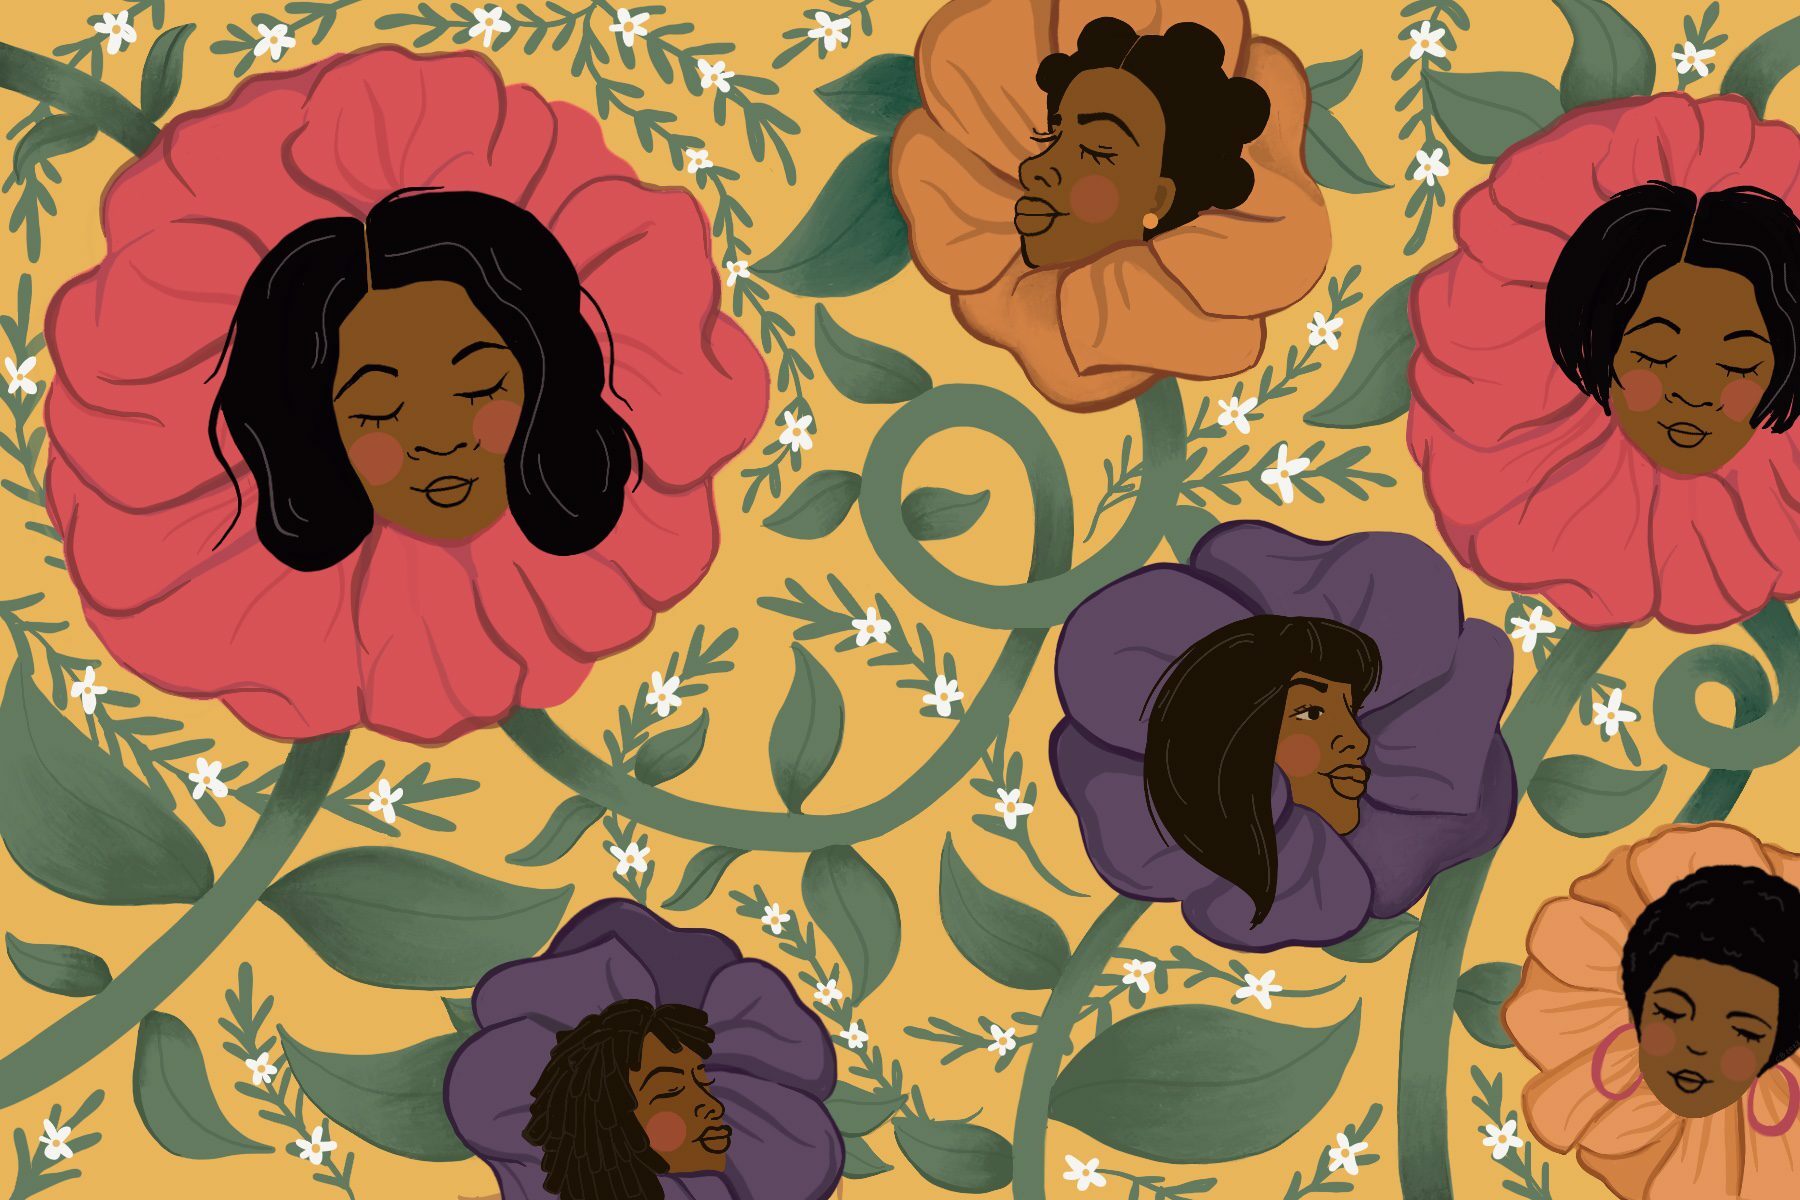 An illustration of Black people finding joy through blooming flowers.